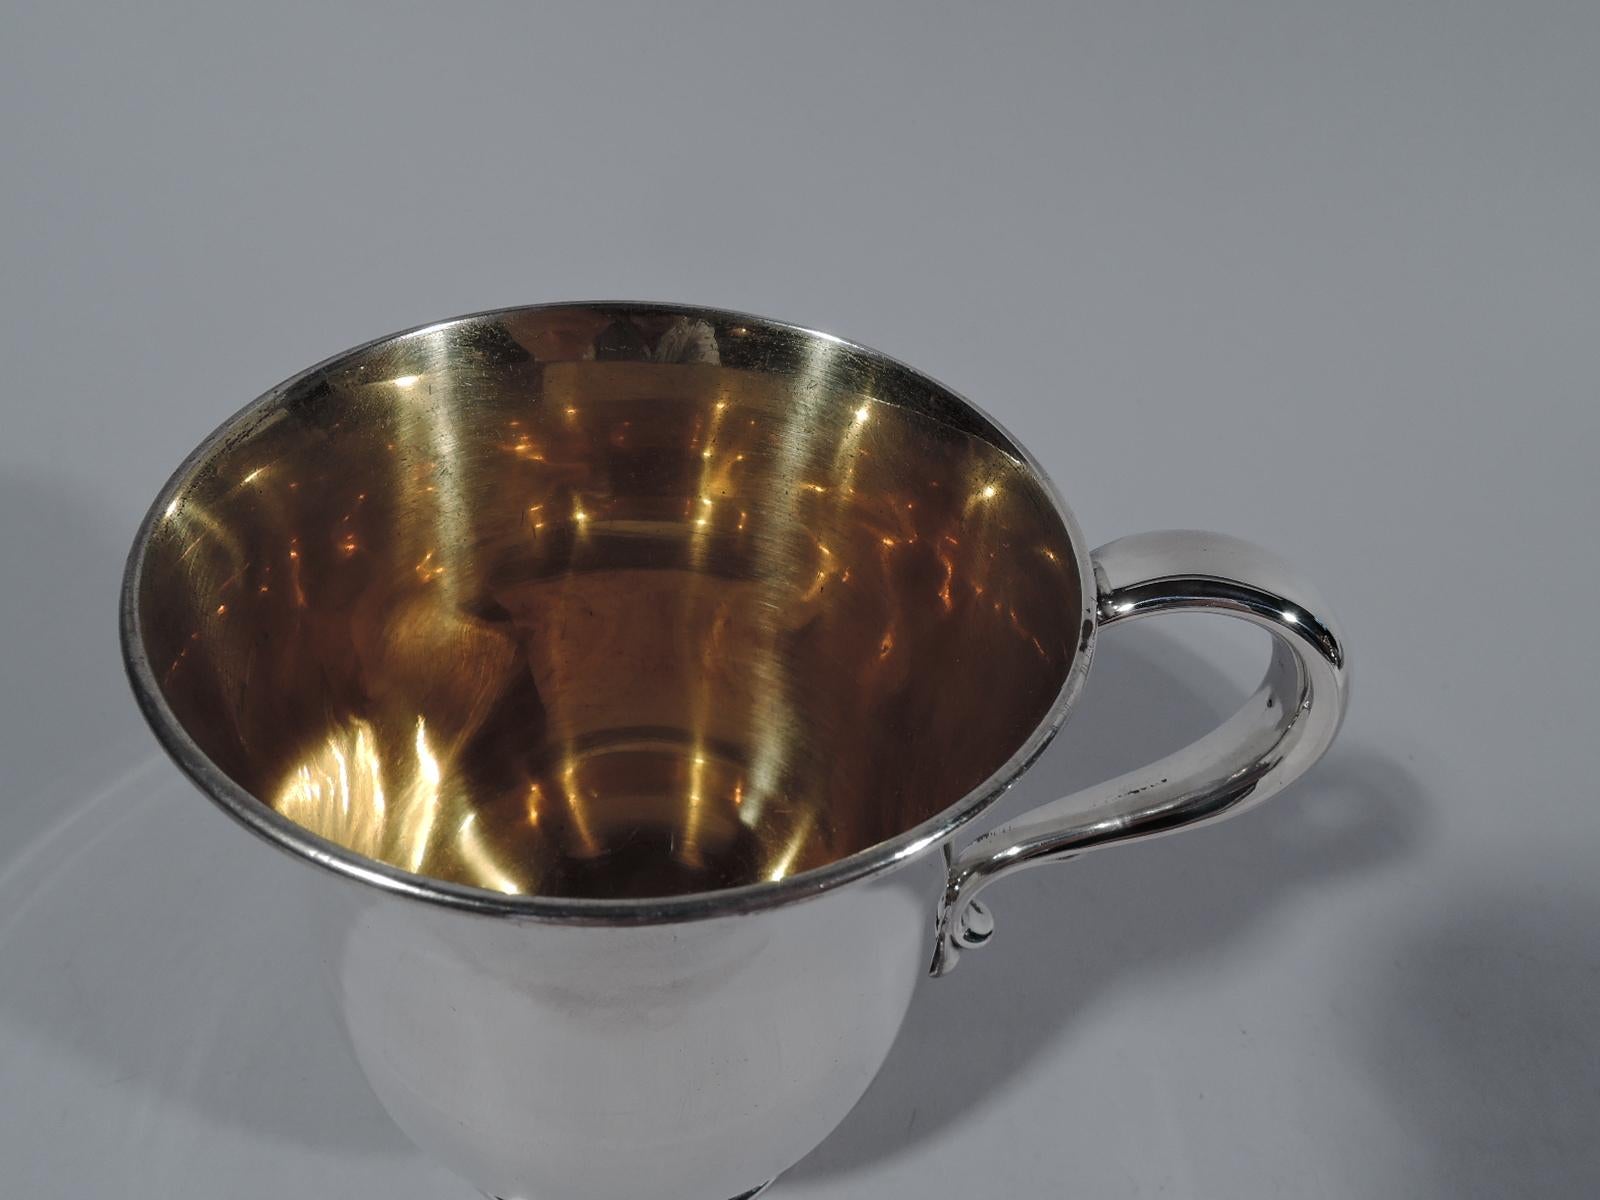 Elegant Edwardian sterling silver baby cup. Made by Tiffany & Co. in New York. Bowl has curved bottom and gently flared and molded rim. S-scroll handle and skirted foot with chased flowers and scrolls. Interior gilt washed. Fully marked including